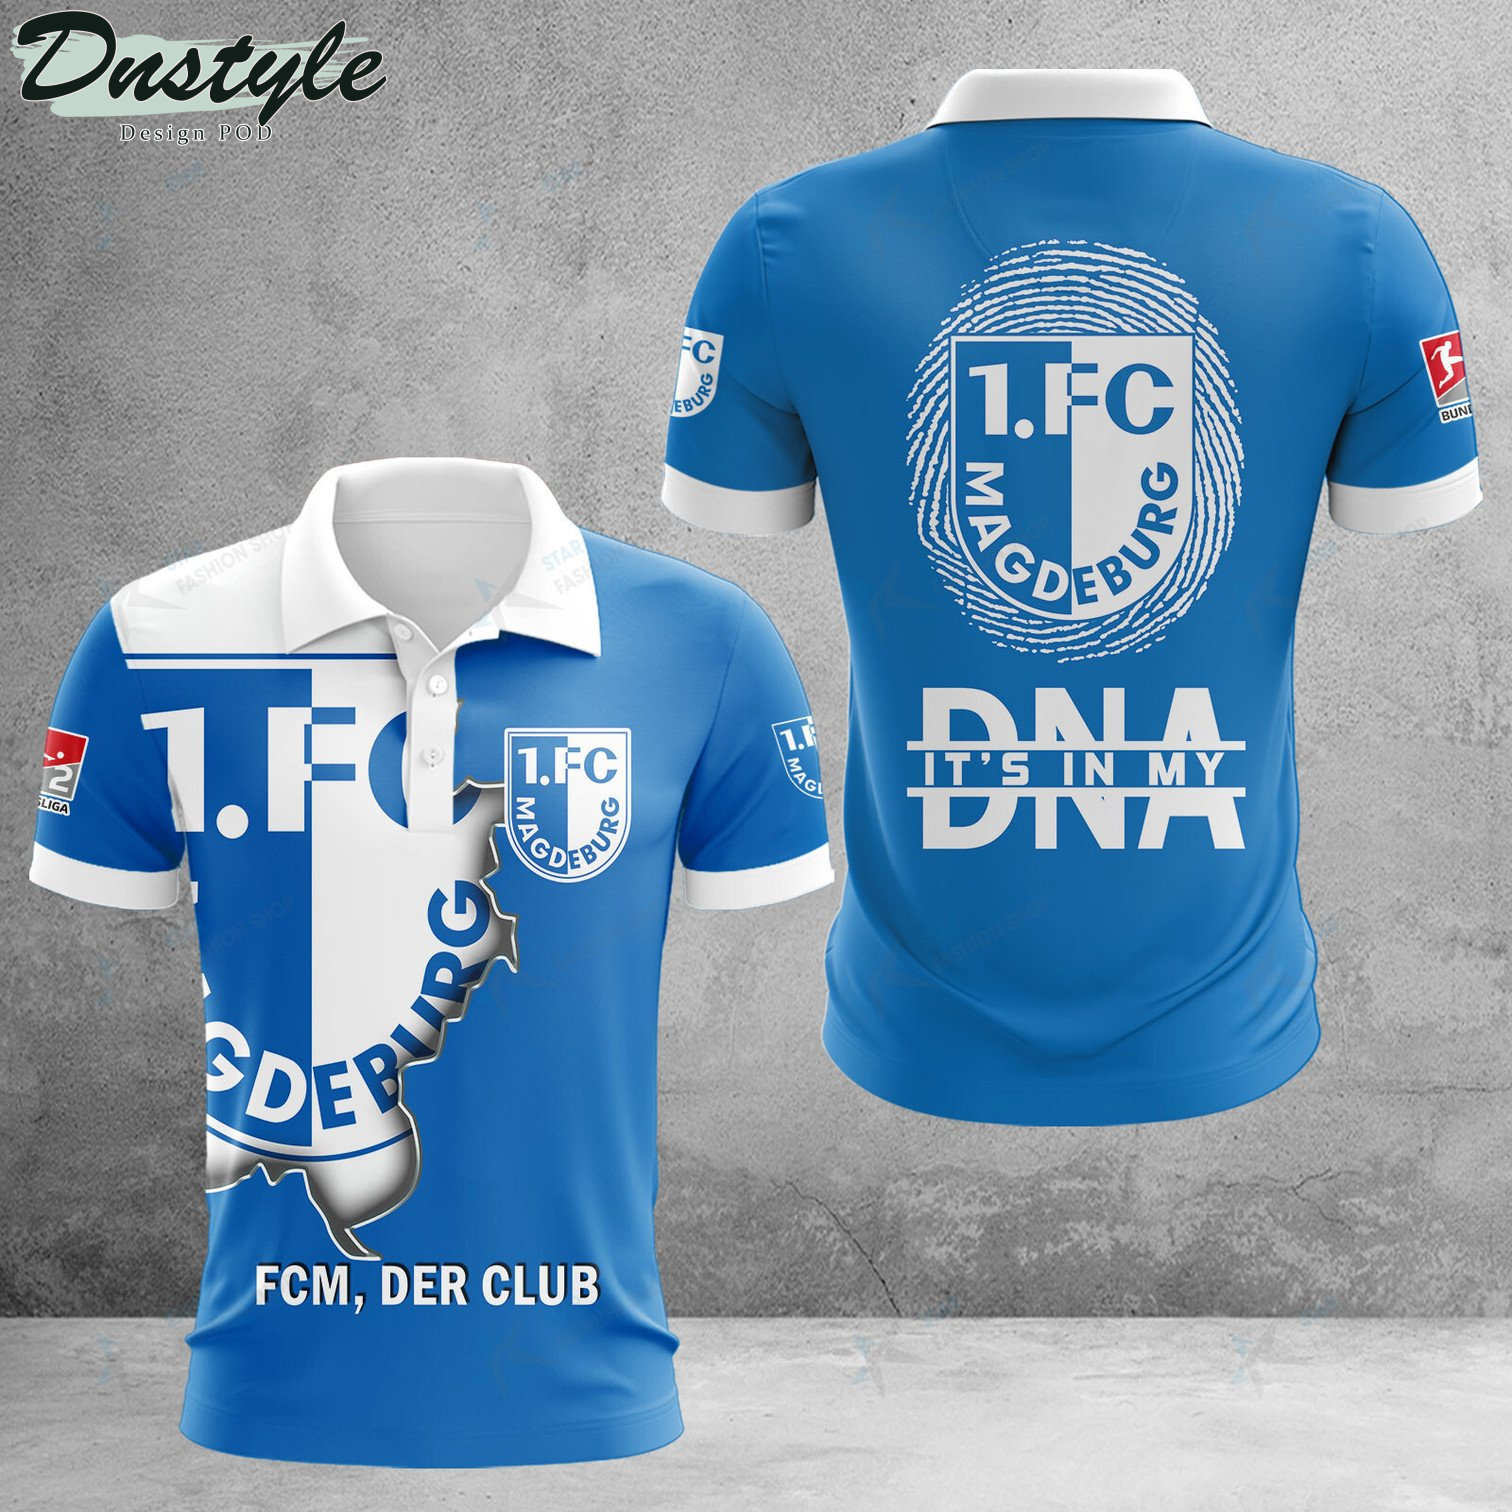 1. FC Magdeburg it's in my DNA polo shirt